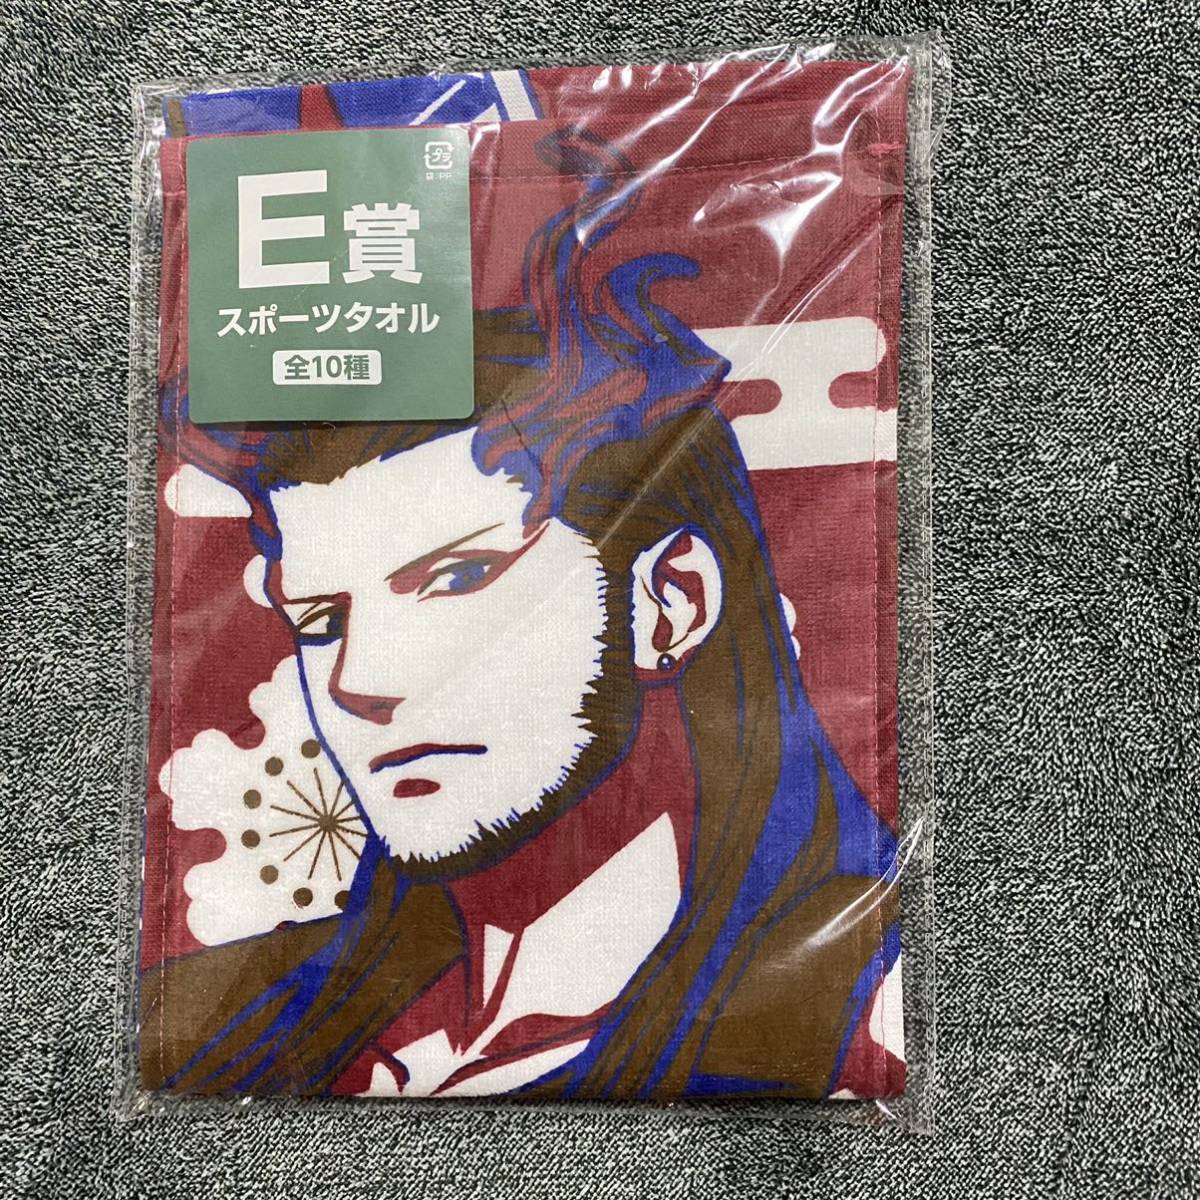  new goods .. cut circle Touken Ranbu towel. . sport towel E. all. lot most lot free shipping including carriage 